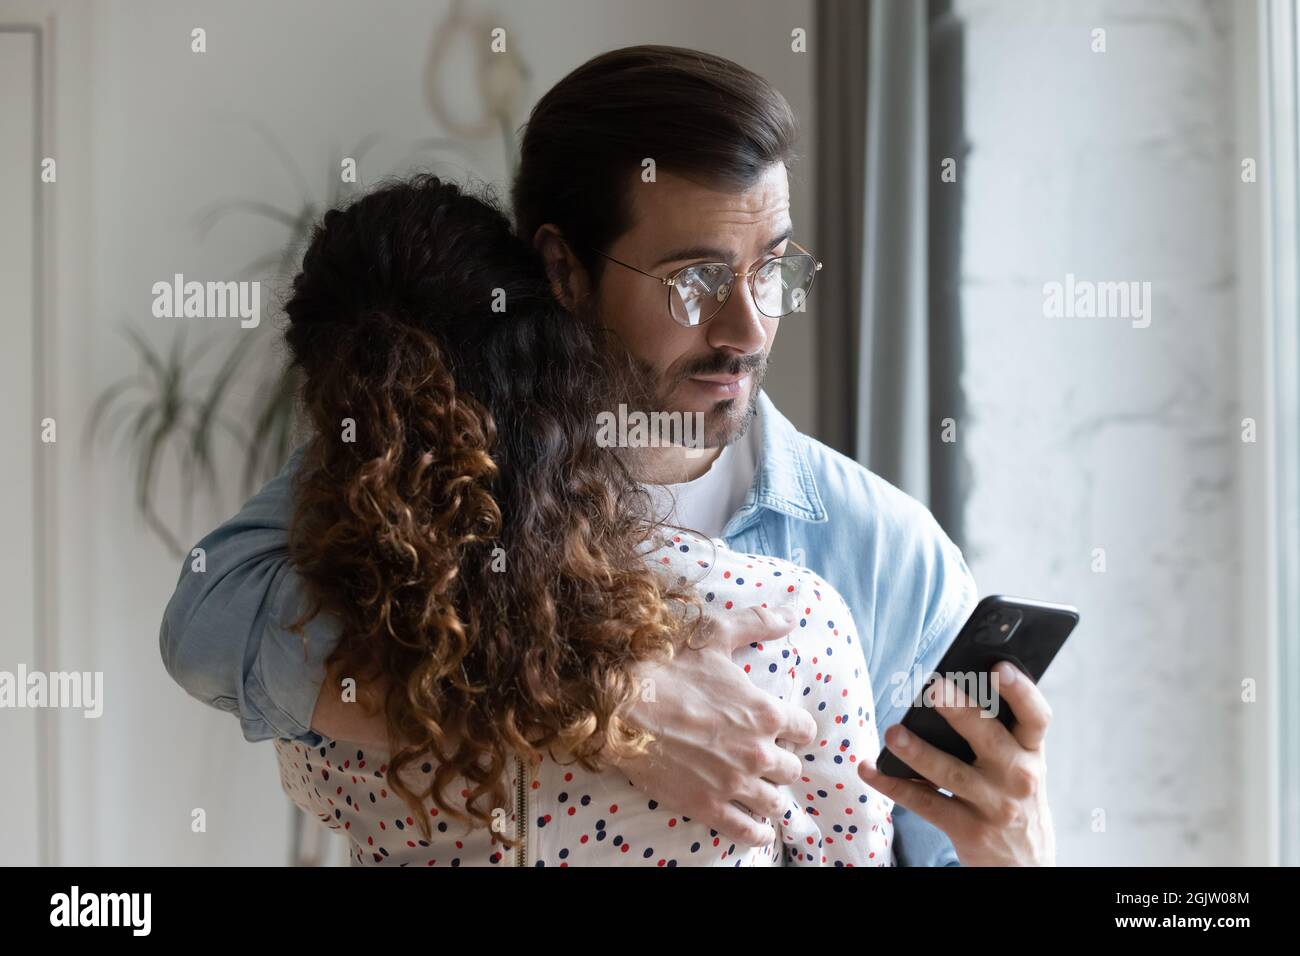 Jealous husband hugging wife and checking her phone Stock Photo